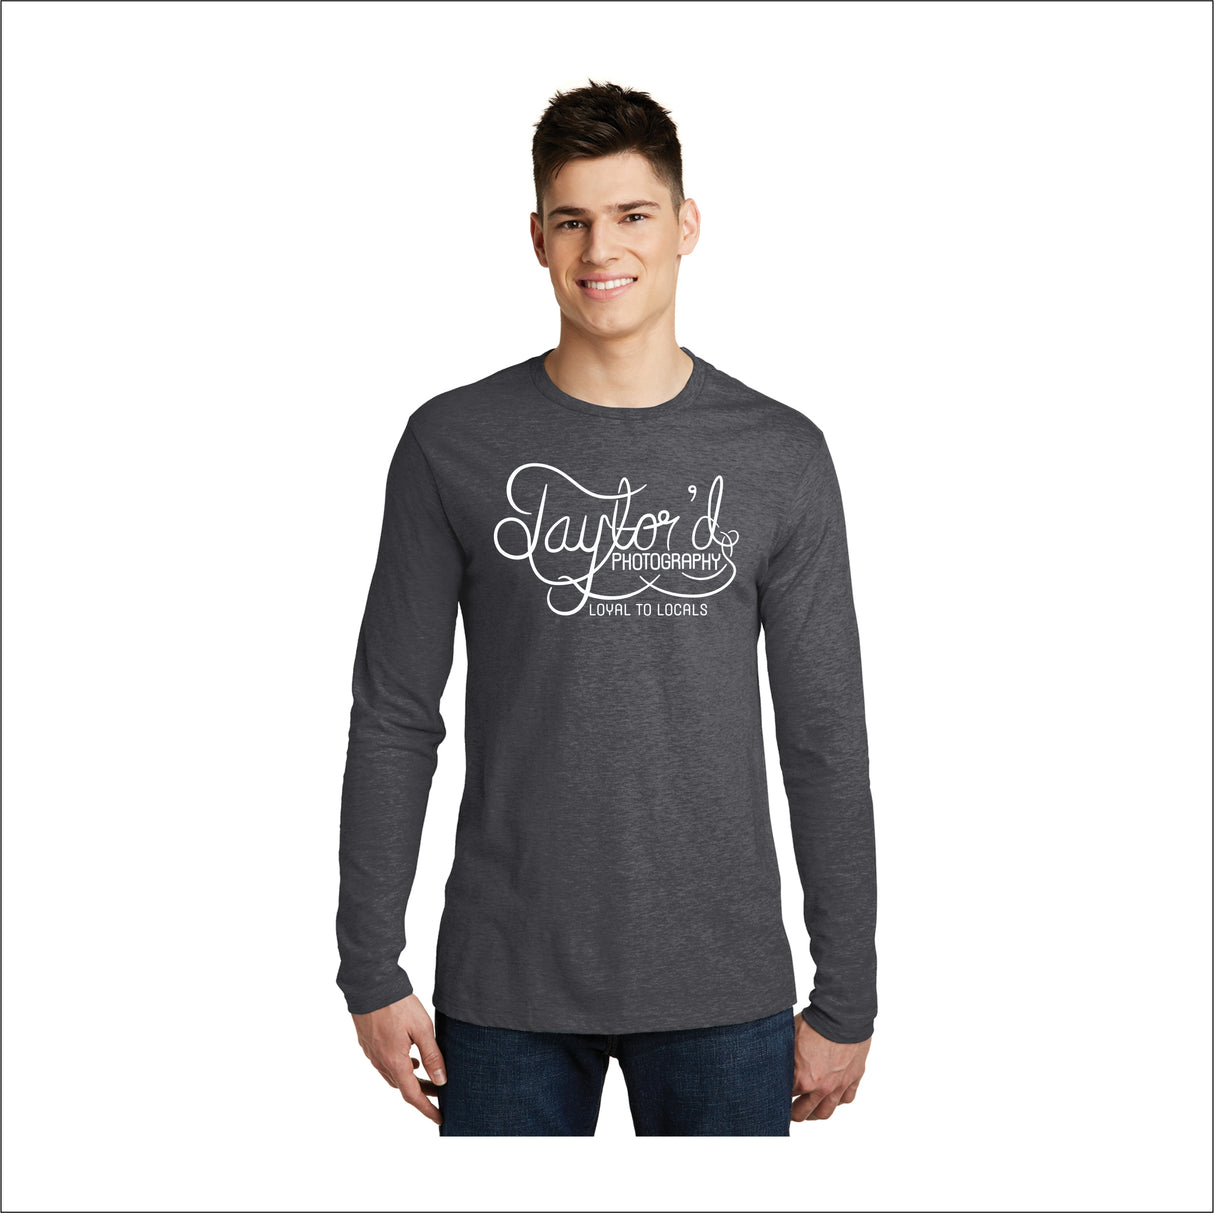 Taylor'd Photography Loyal To Locals Long-Sleeve Tee